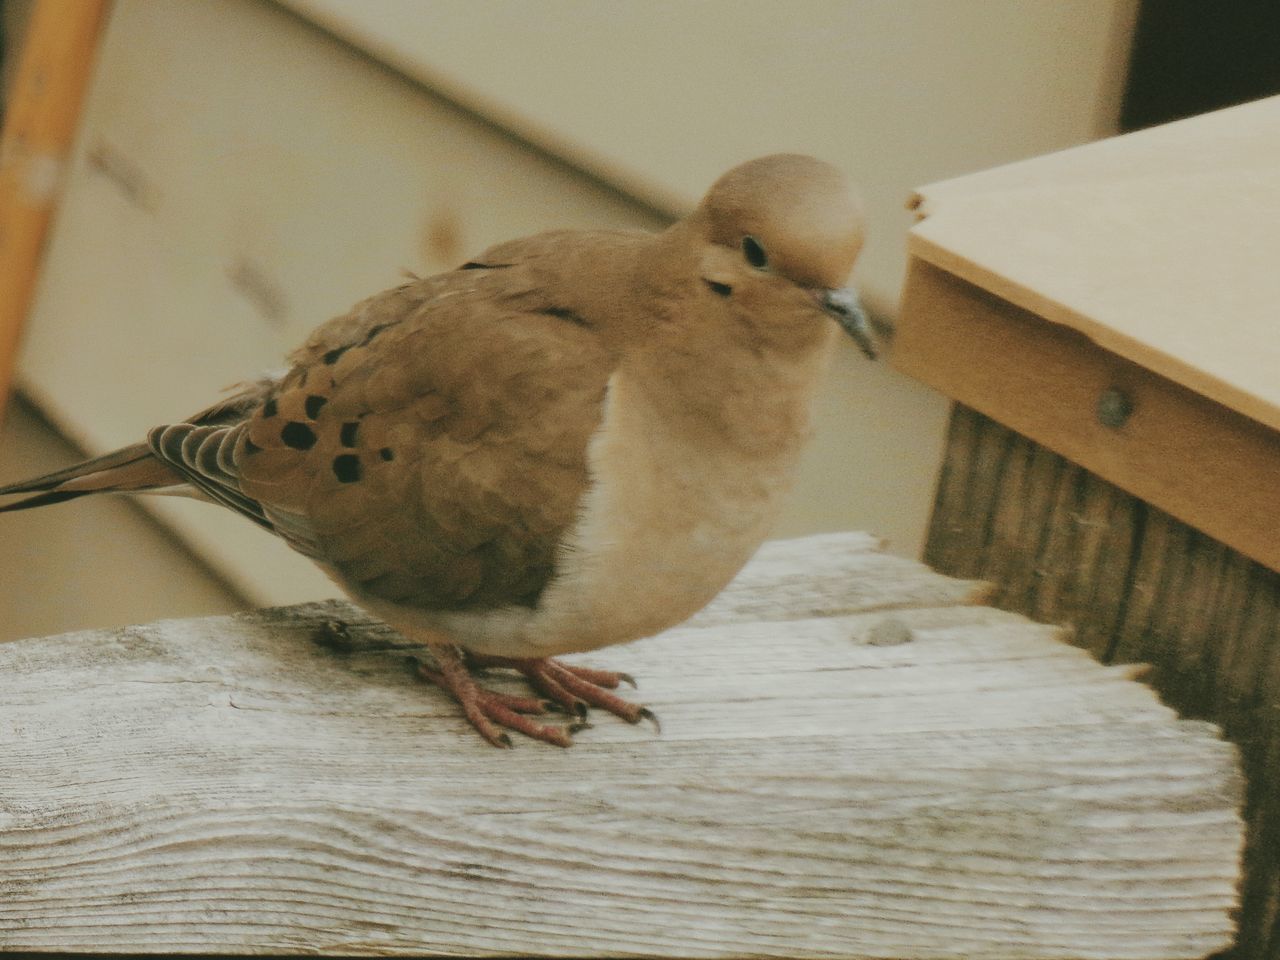 CLOSE-UP OF BIRD PERCHING ON WOODEN WALL